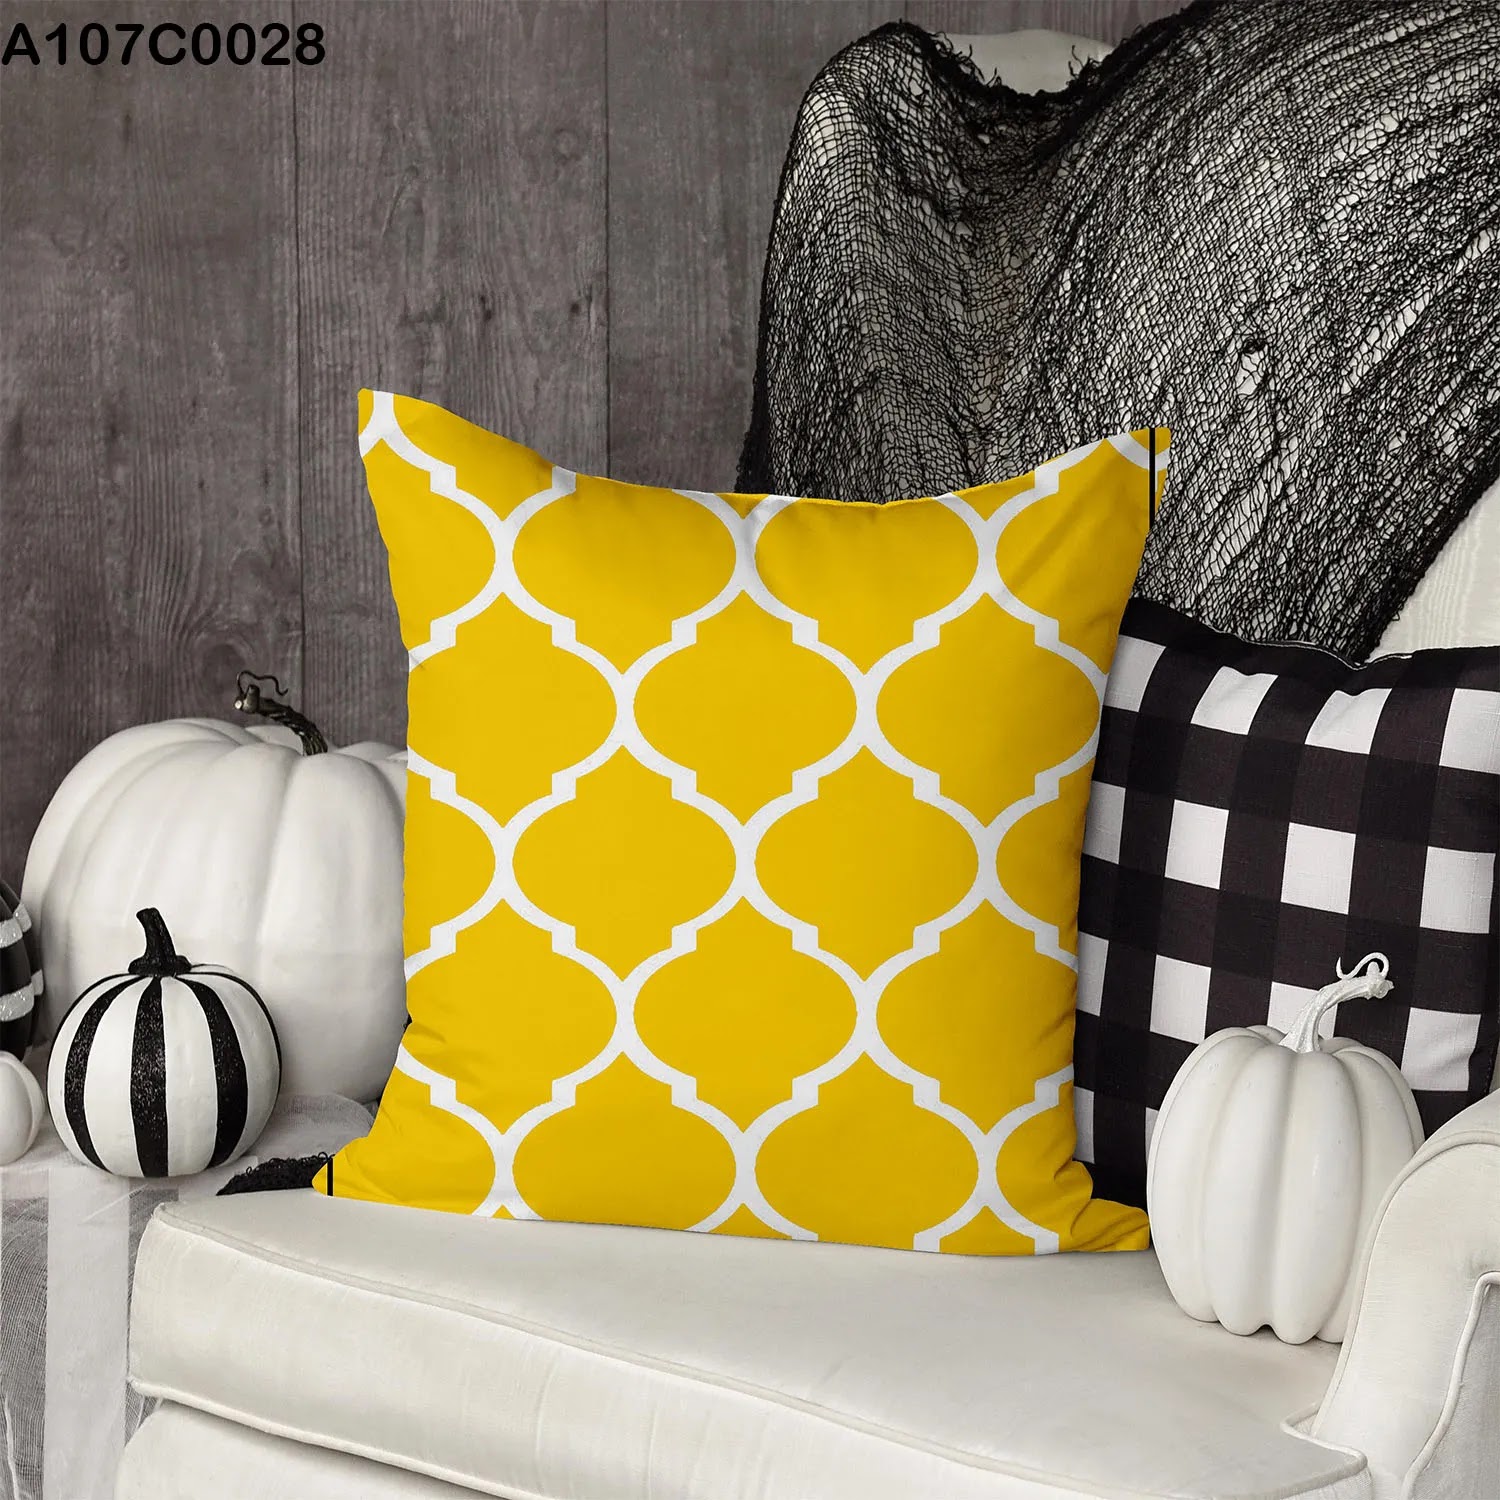 Yellow pillow case with white lines and shapes